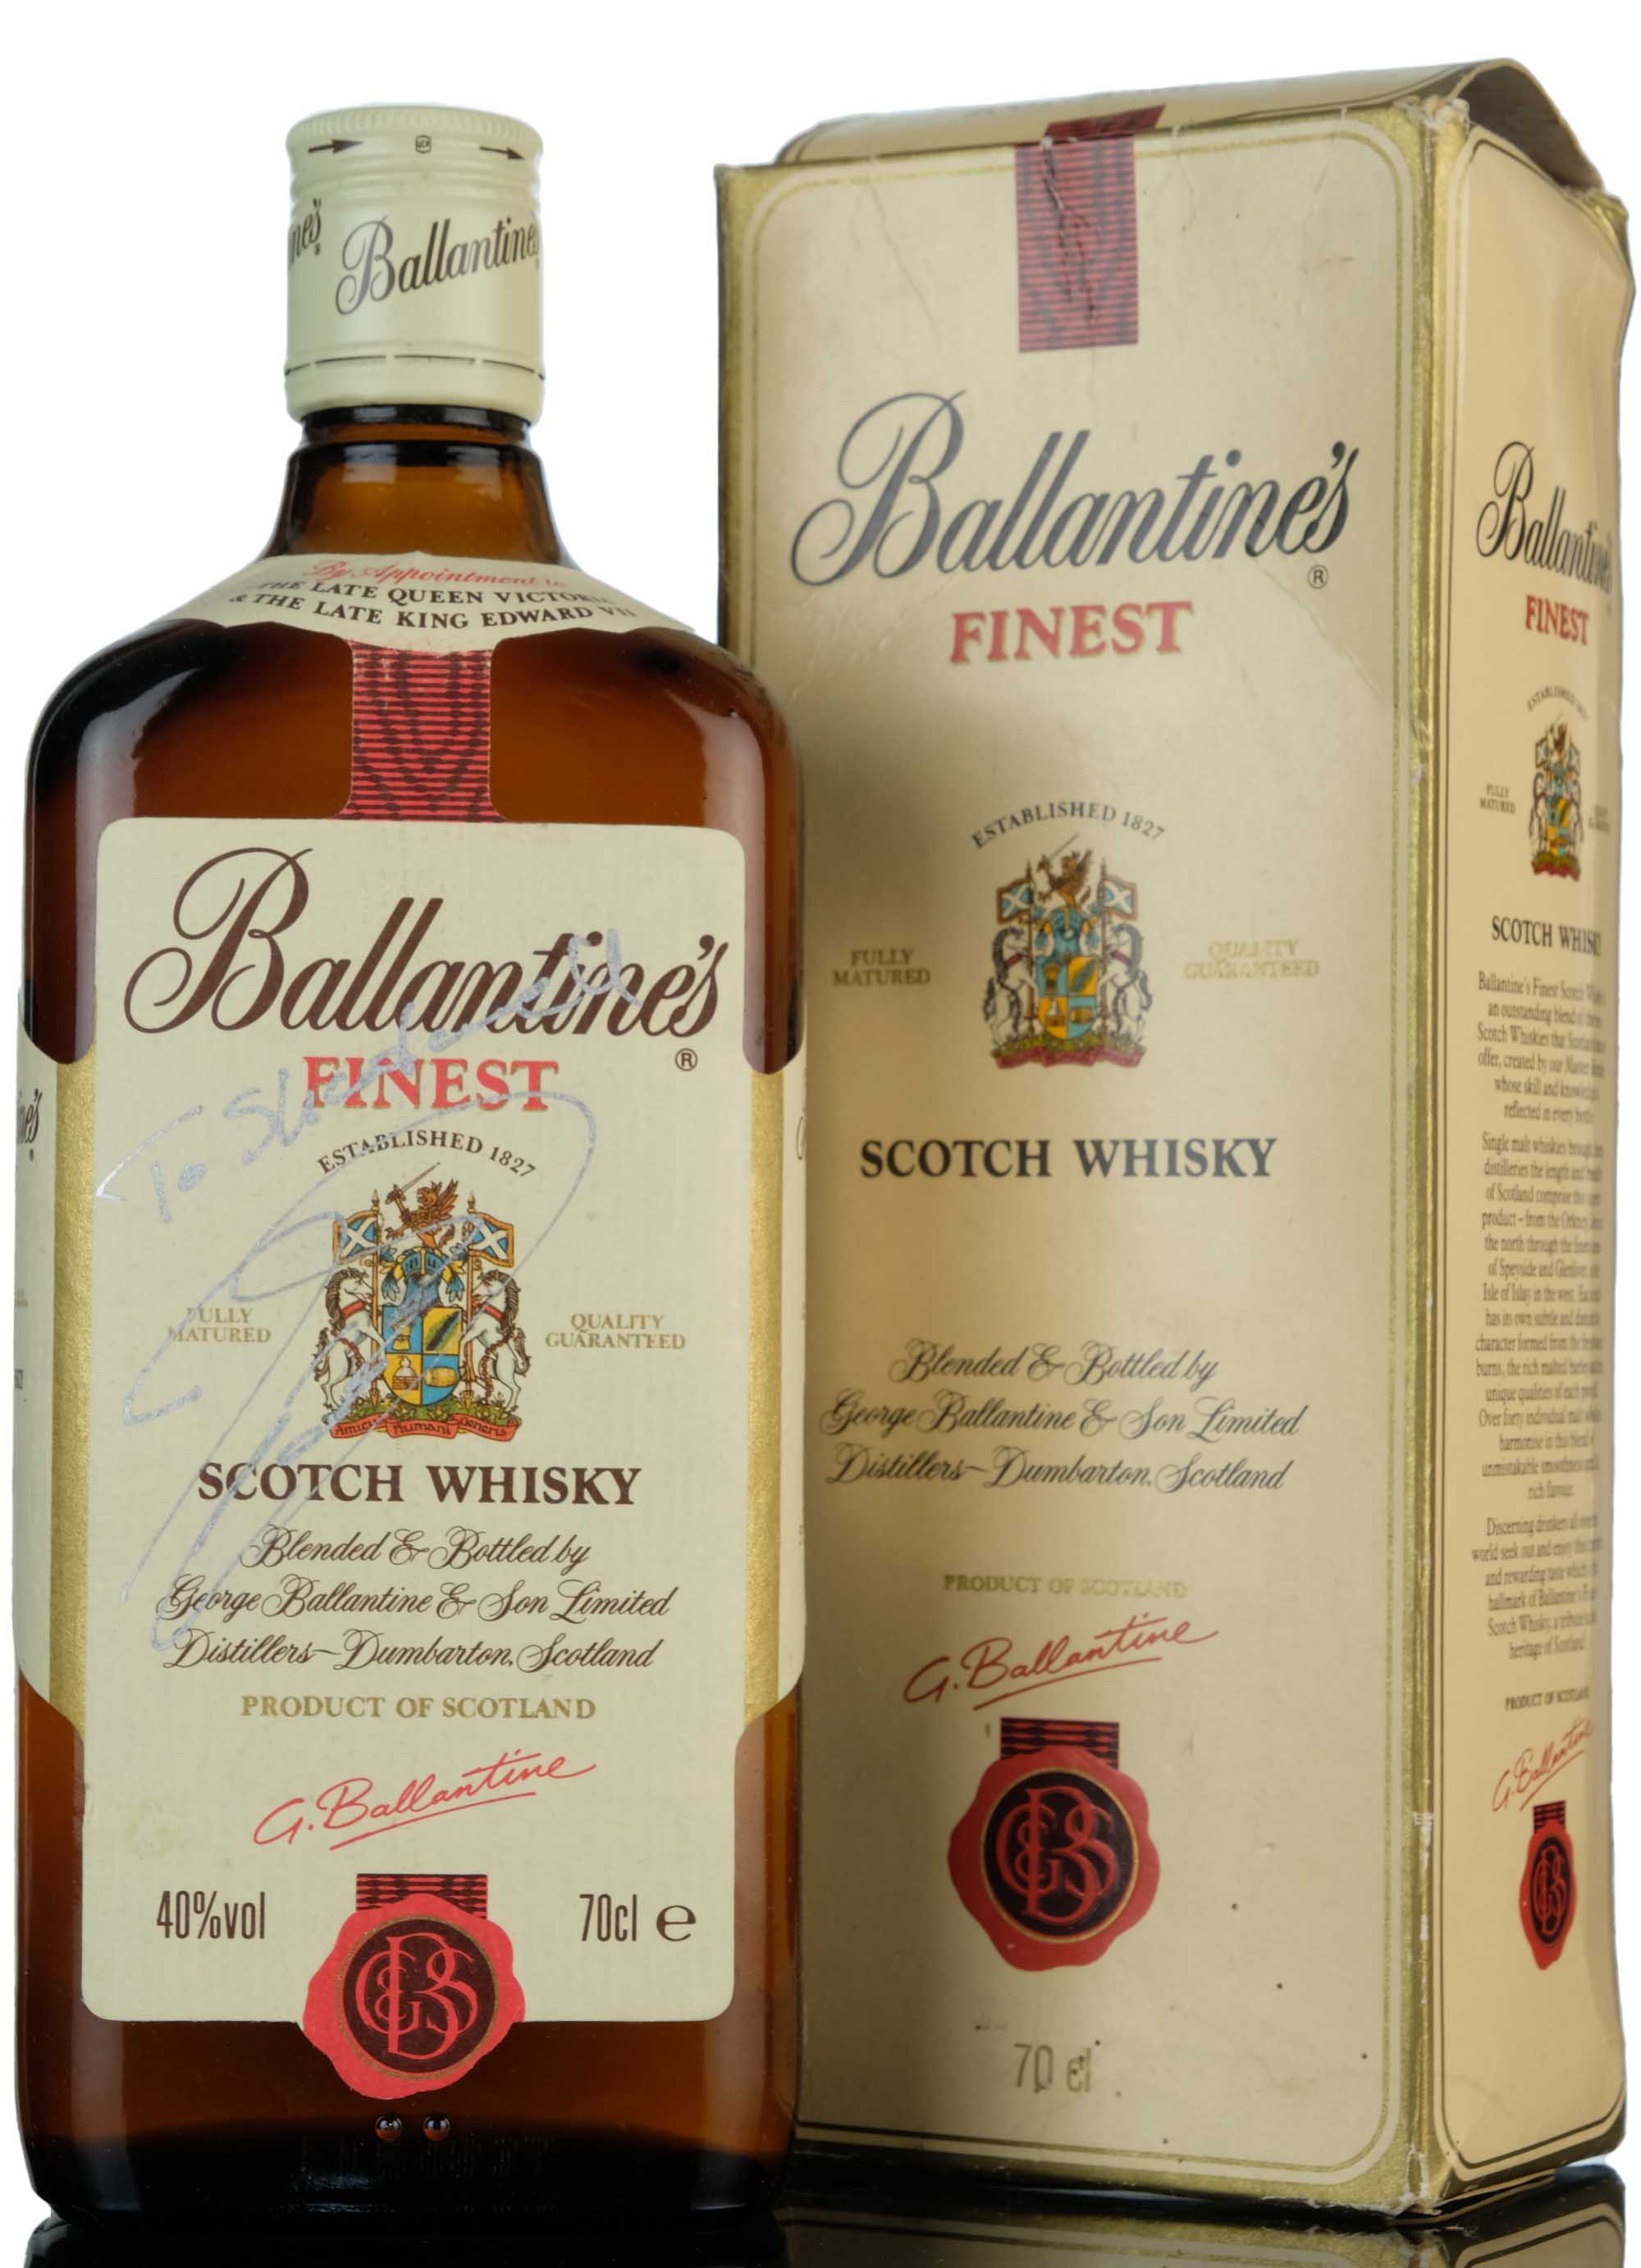 Ballantines Finest - Signed By David Coulthard